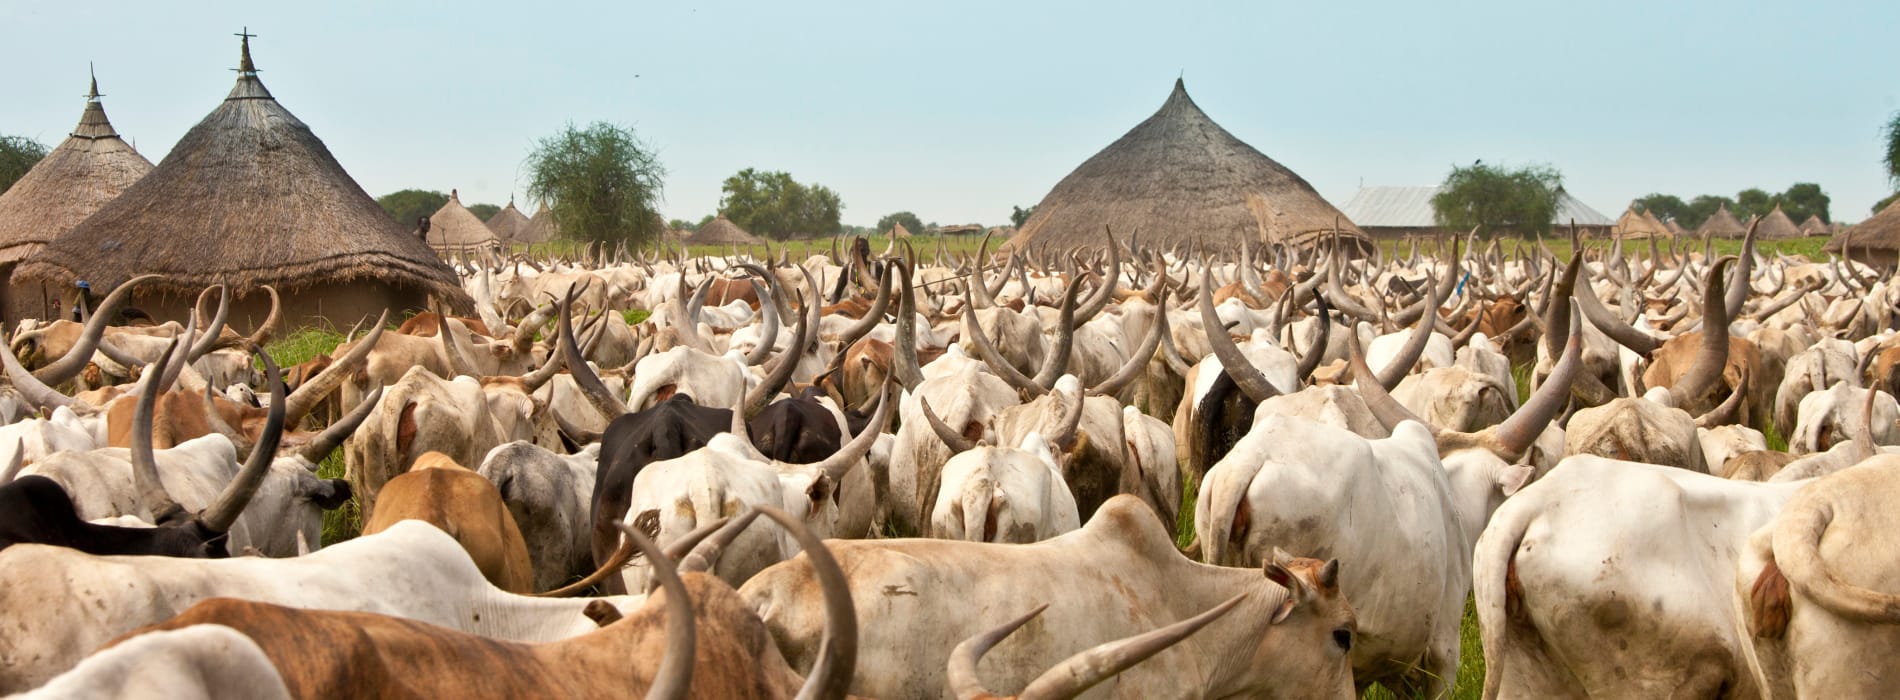 Herd of long-horned cattle grazing outside a small village. 